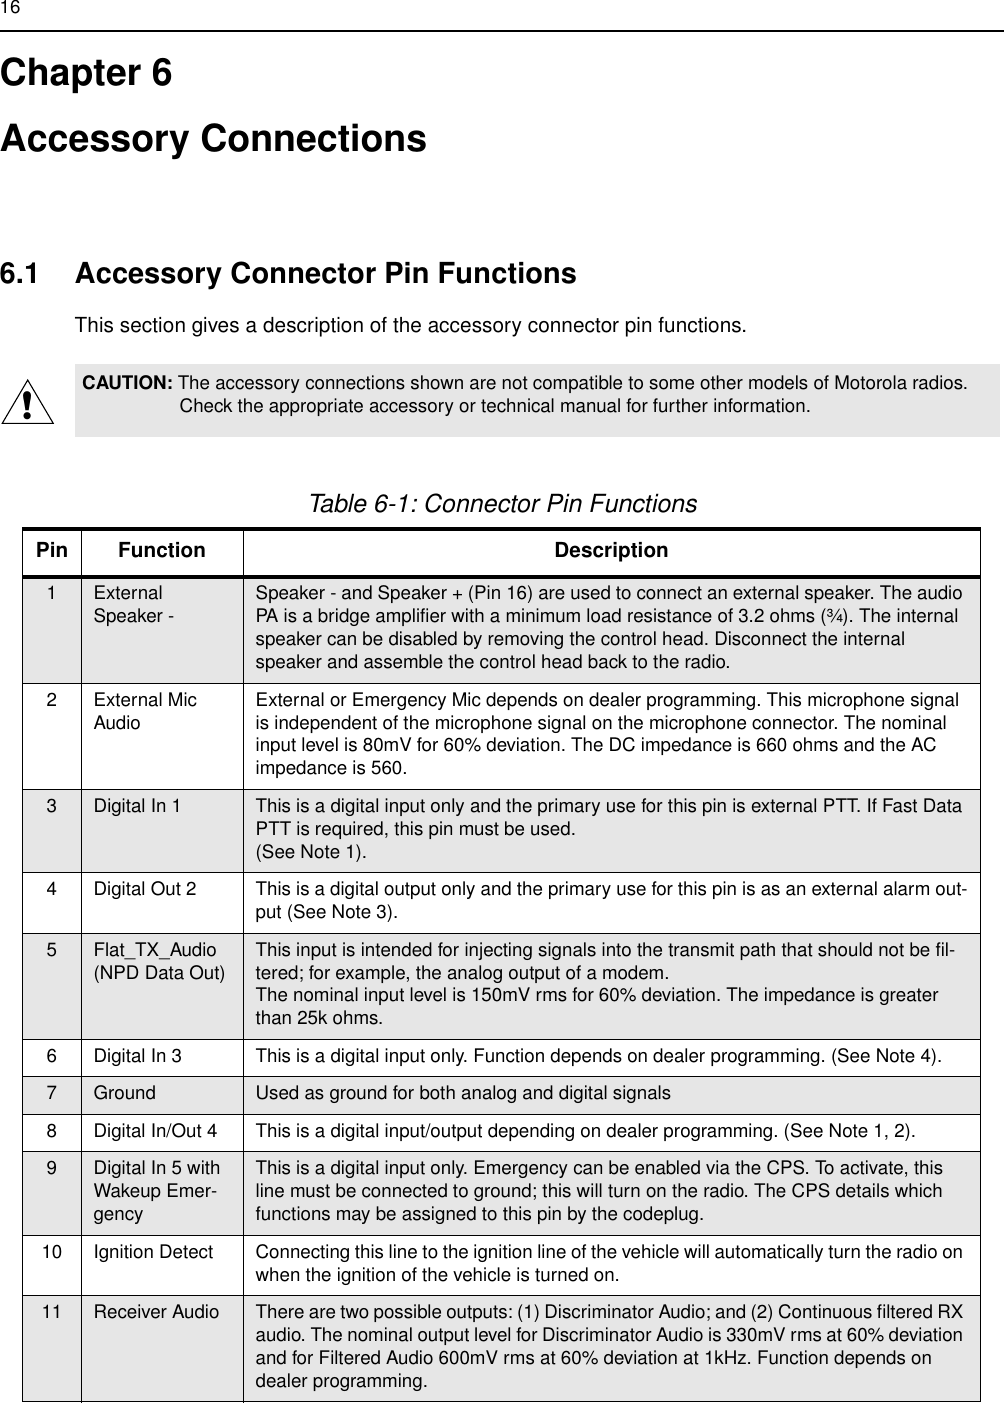 16Chapter 6Accessory Connections6.1 Accessory Connector Pin FunctionsThis section gives a description of the accessory connector pin functions.CAUTION: The accessory connections shown are not compatible to some other models of Motorola radios. Check the appropriate accessory or technical manual for further information.Table 6-1: Connector Pin FunctionsPin Function Description1External Speaker - Speaker - and Speaker + (Pin 16) are used to connect an external speaker. The audio PA is a bridge amplifier with a minimum load resistance of 3.2 ohms (¾). The internal speaker can be disabled by removing the control head. Disconnect the internal speaker and assemble the control head back to the radio.2External Mic Audio External or Emergency Mic depends on dealer programming. This microphone signal is independent of the microphone signal on the microphone connector. The nominal input level is 80mV for 60% deviation. The DC impedance is 660 ohms and the AC impedance is 560.3Digital In 1 This is a digital input only and the primary use for this pin is external PTT. If Fast Data PTT is required, this pin must be used.(See Note 1).4 Digital Out 2 This is a digital output only and the primary use for this pin is as an external alarm out-put (See Note 3).5Flat_TX_Audio (NPD Data Out) This input is intended for injecting signals into the transmit path that should not be fil-tered; for example, the analog output of a modem.The nominal input level is 150mV rms for 60% deviation. The impedance is greater than 25k ohms.6 Digital In 3 This is a digital input only. Function depends on dealer programming. (See Note 4).7Ground Used as ground for both analog and digital signals8 Digital In/Out 4 This is a digital input/output depending on dealer programming. (See Note 1, 2).9Digital In 5 with Wakeup Emer-gencyThis is a digital input only. Emergency can be enabled via the CPS. To activate, this line must be connected to ground; this will turn on the radio. The CPS details which functions may be assigned to this pin by the codeplug.10 Ignition Detect Connecting this line to the ignition line of the vehicle will automatically turn the radio on when the ignition of the vehicle is turned on.11 Receiver Audio There are two possible outputs: (1) Discriminator Audio; and (2) Continuous filtered RX audio. The nominal output level for Discriminator Audio is 330mV rms at 60% deviation and for Filtered Audio 600mV rms at 60% deviation at 1kHz. Function depends on dealer programming. !